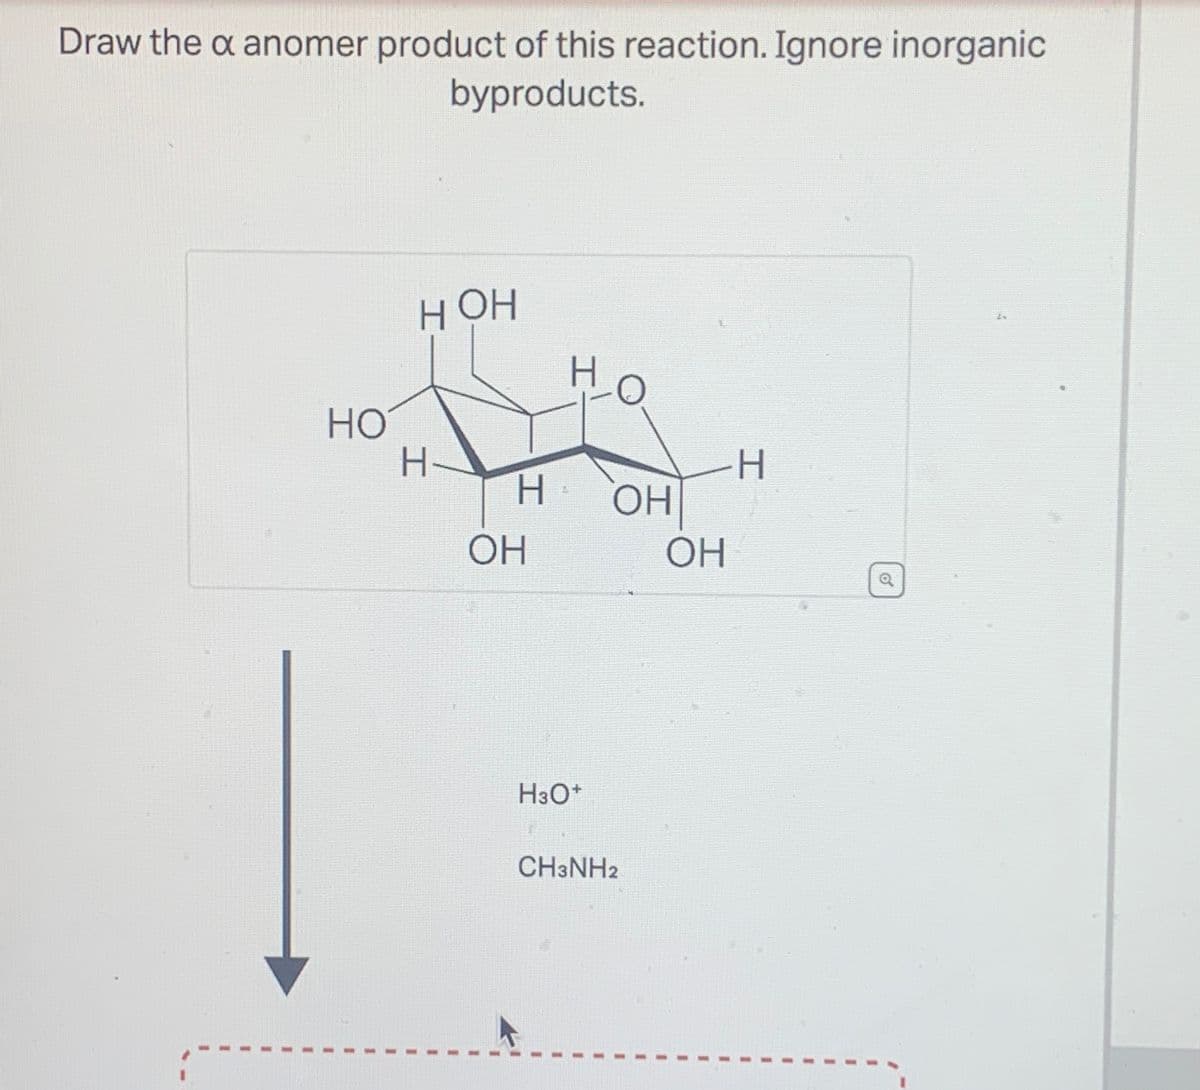 Draw the x anomer product of this reaction. Ignore inorganic
byproducts.
HOH
H
HO
H-
OH
H OH
H3O+
CH3NH2
H
OH
a